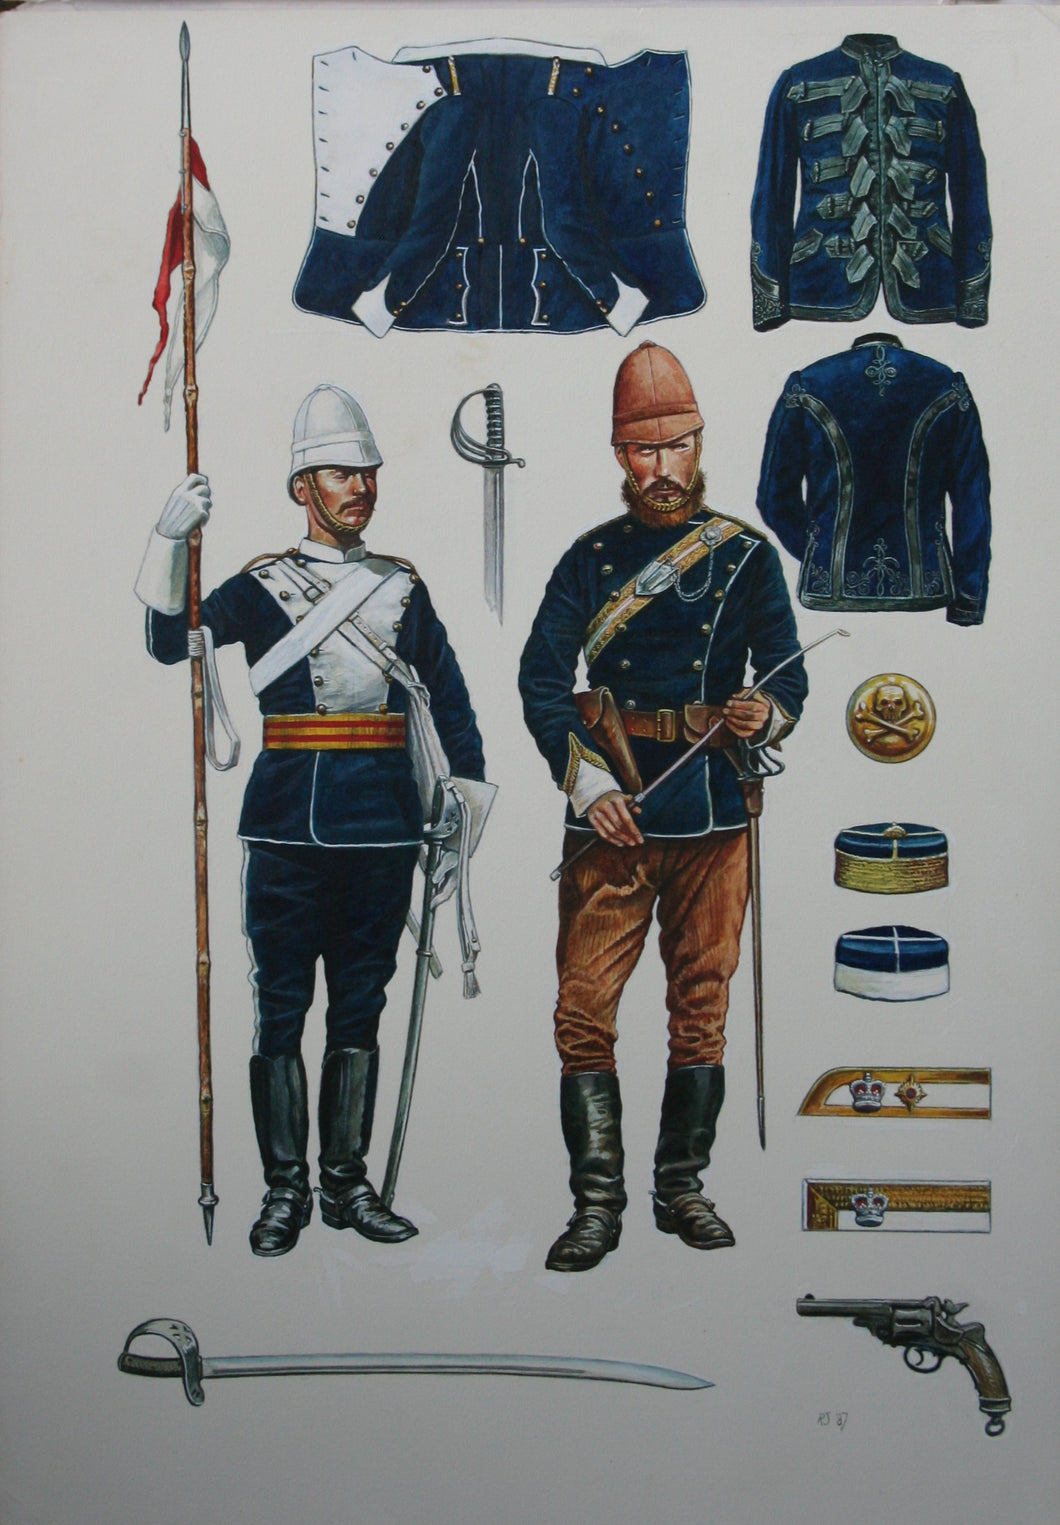 Original Artwork By Rick Scollins Depicting Uniforms of the 17th Lancers, Anglo-Zulu War 1879